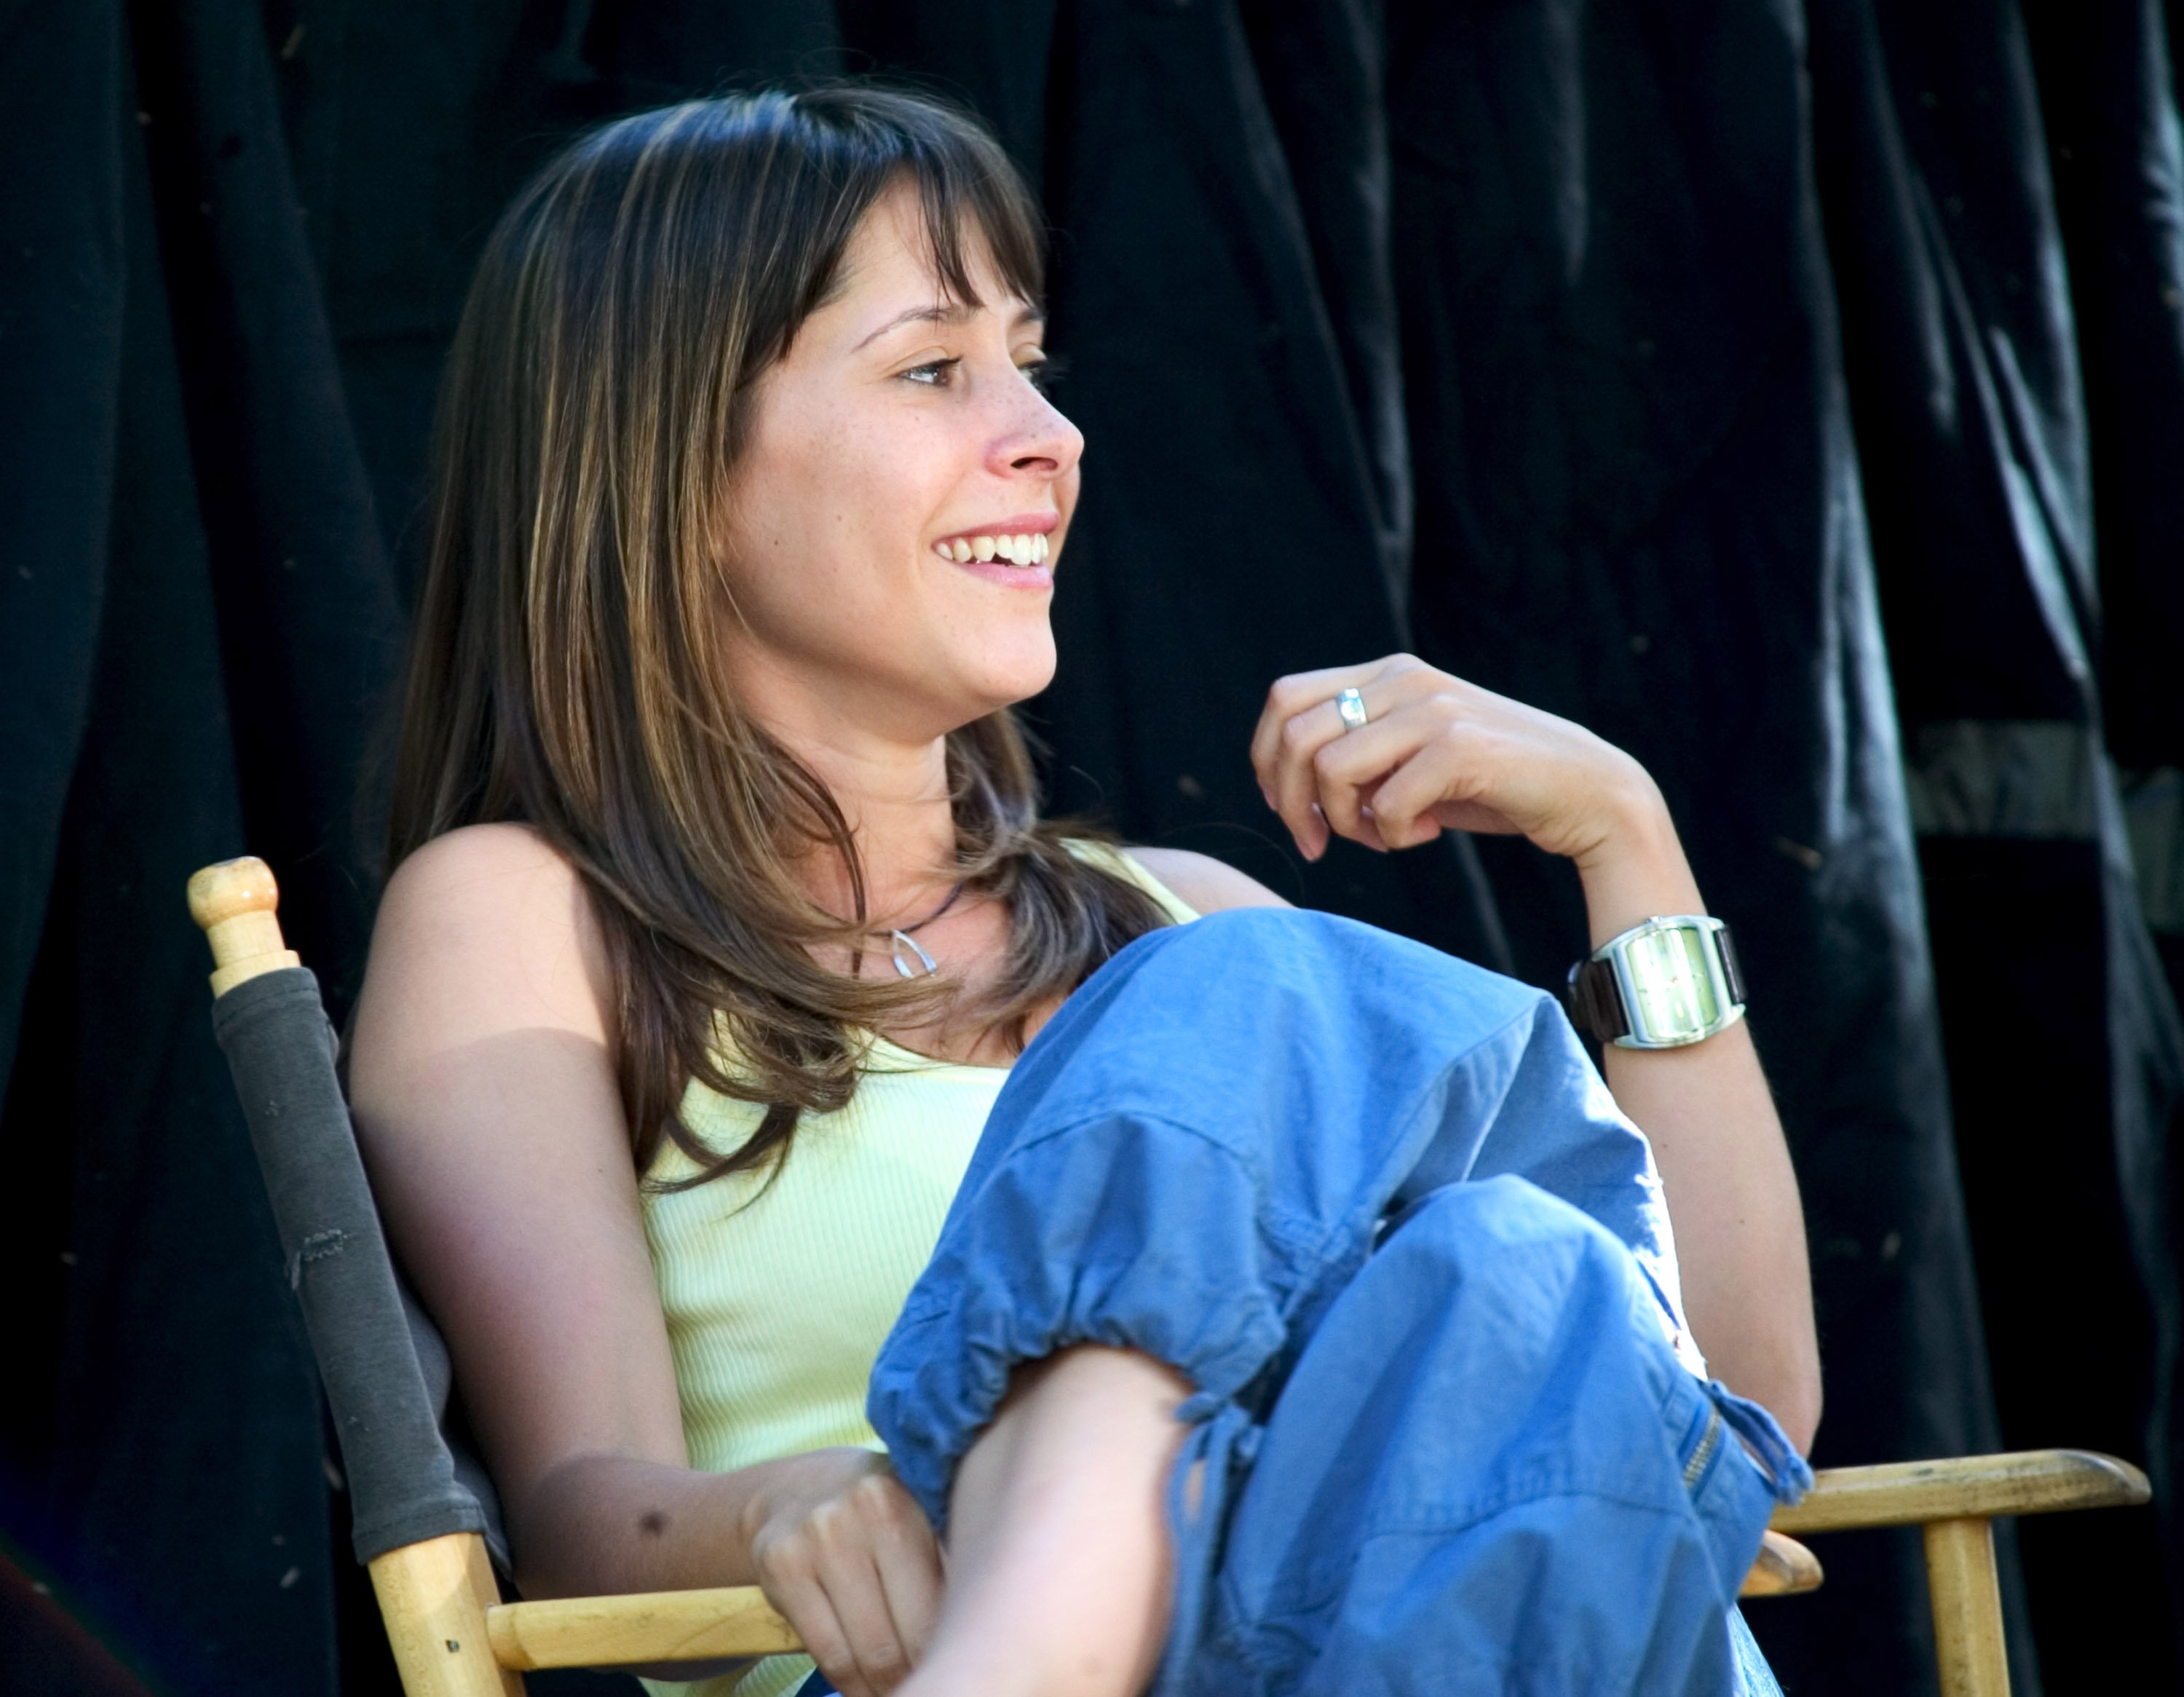 Kimberly McCullough during "Inn Trouble" Filming on Location at Lake Zaca in Los Olivos, CA, United States.